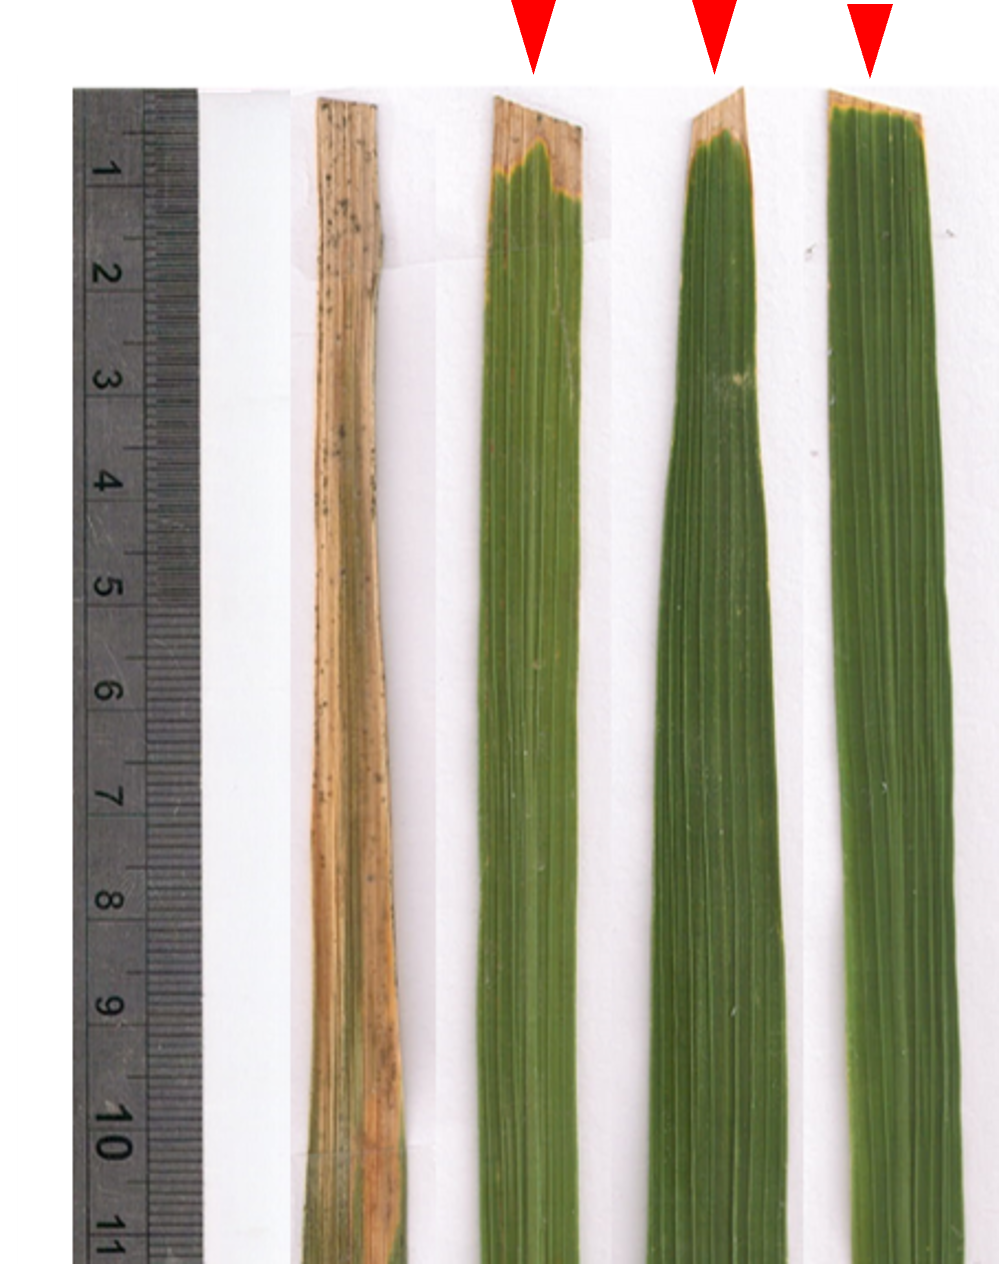 Breeding Rice for Resistance to Bacterial Blight Disease